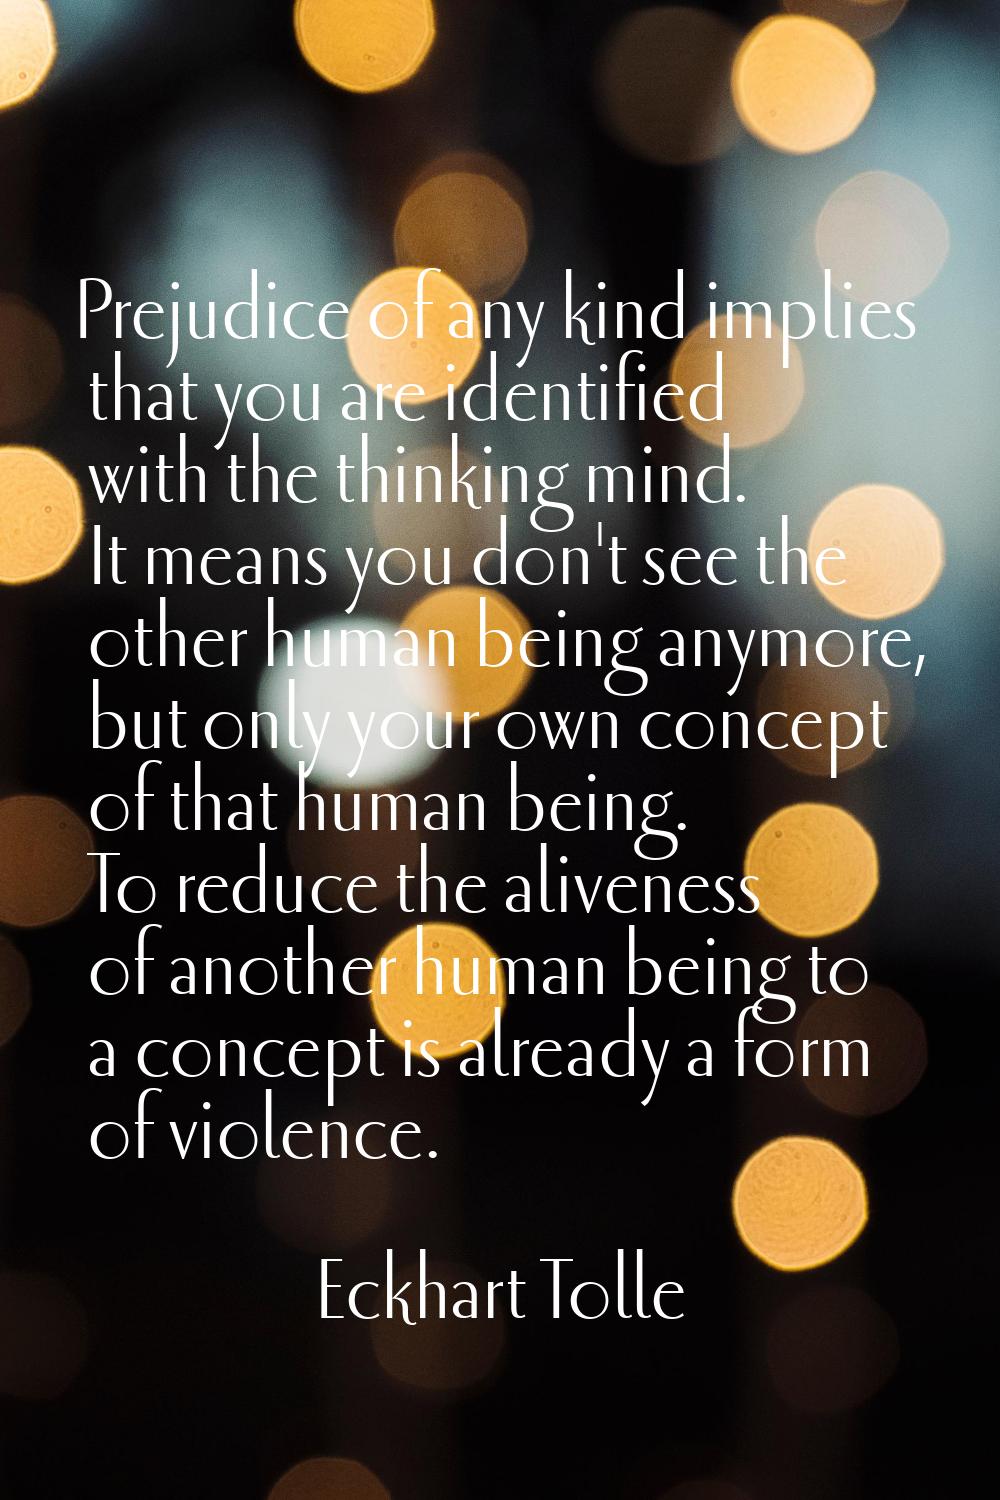 Prejudice of any kind implies that you are identified with the thinking mind. It means you don't se